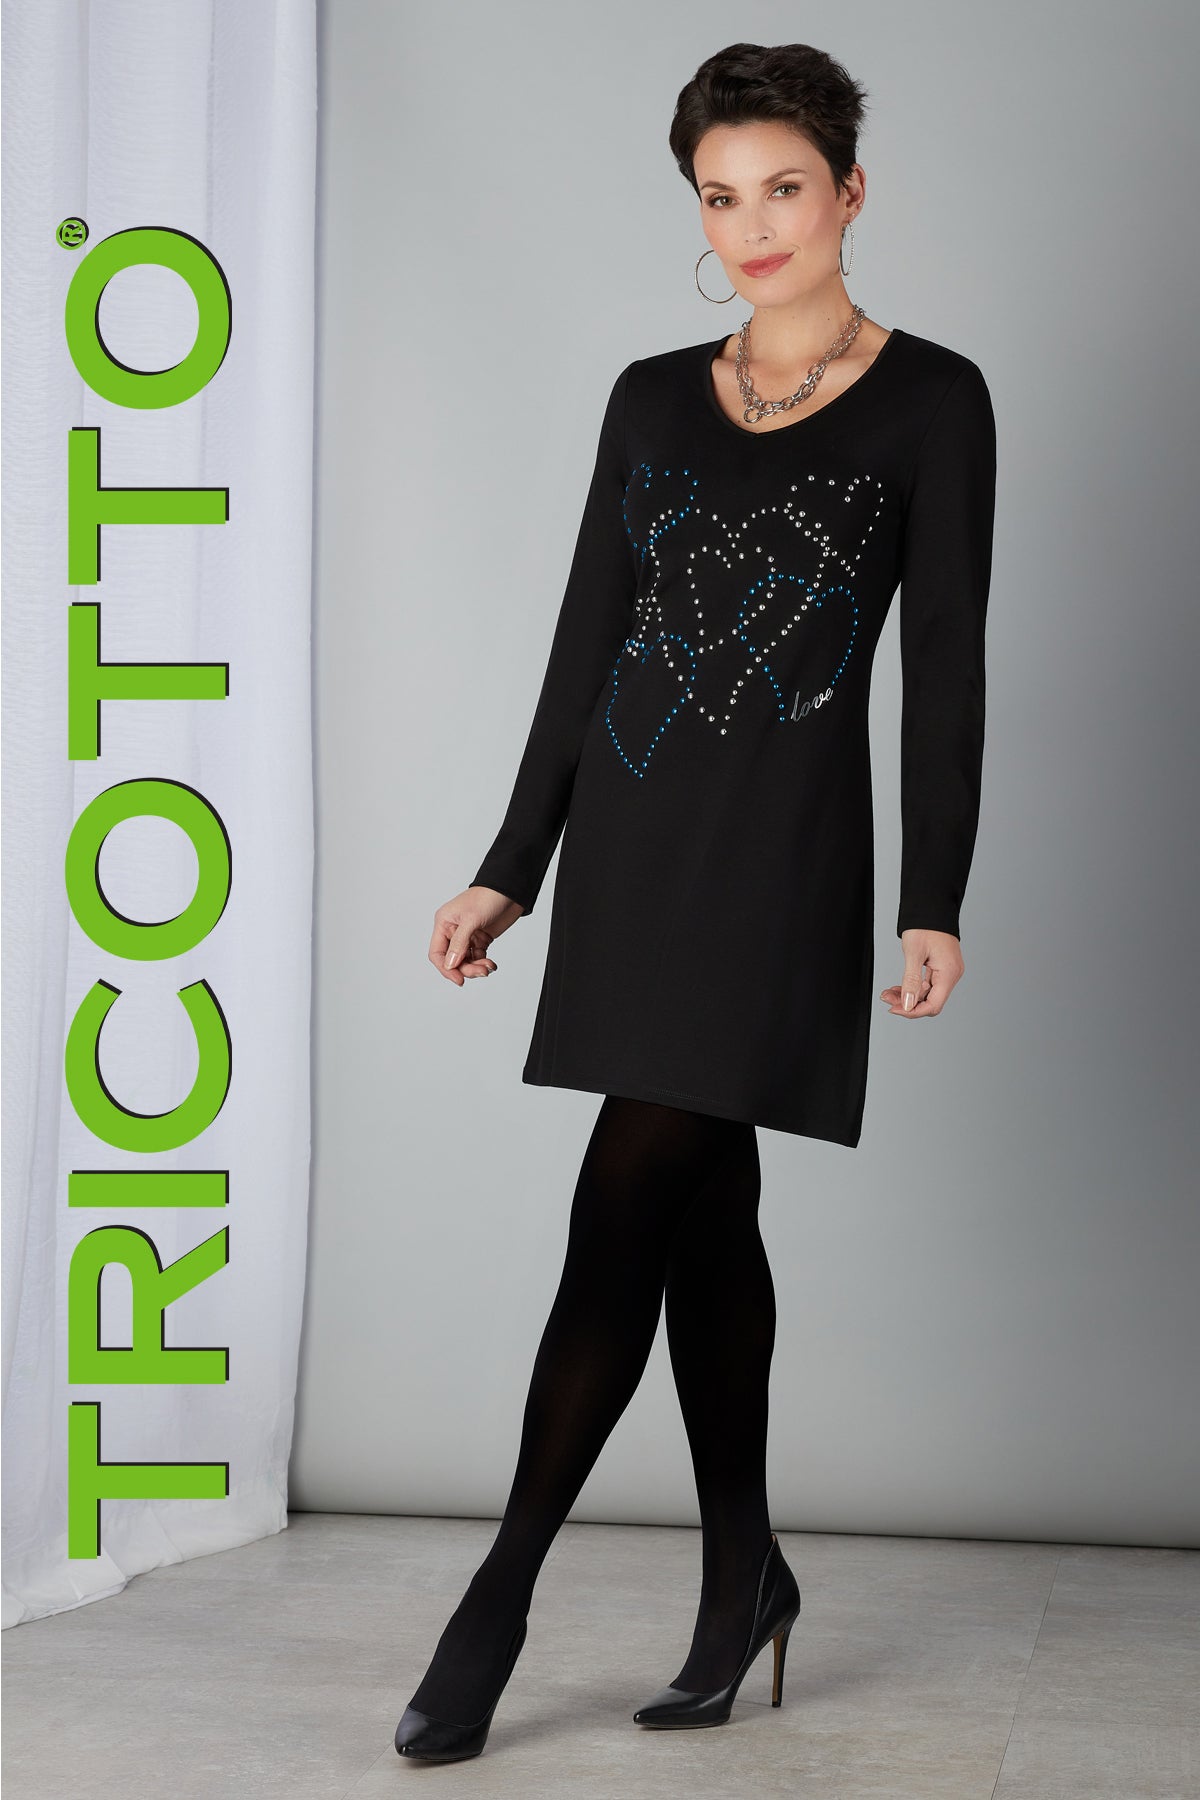 Tricotto Sequin Dress-Buy Tricotto Dresses Online-Tricotto Clothing Montreal-Little Black Dresses Online